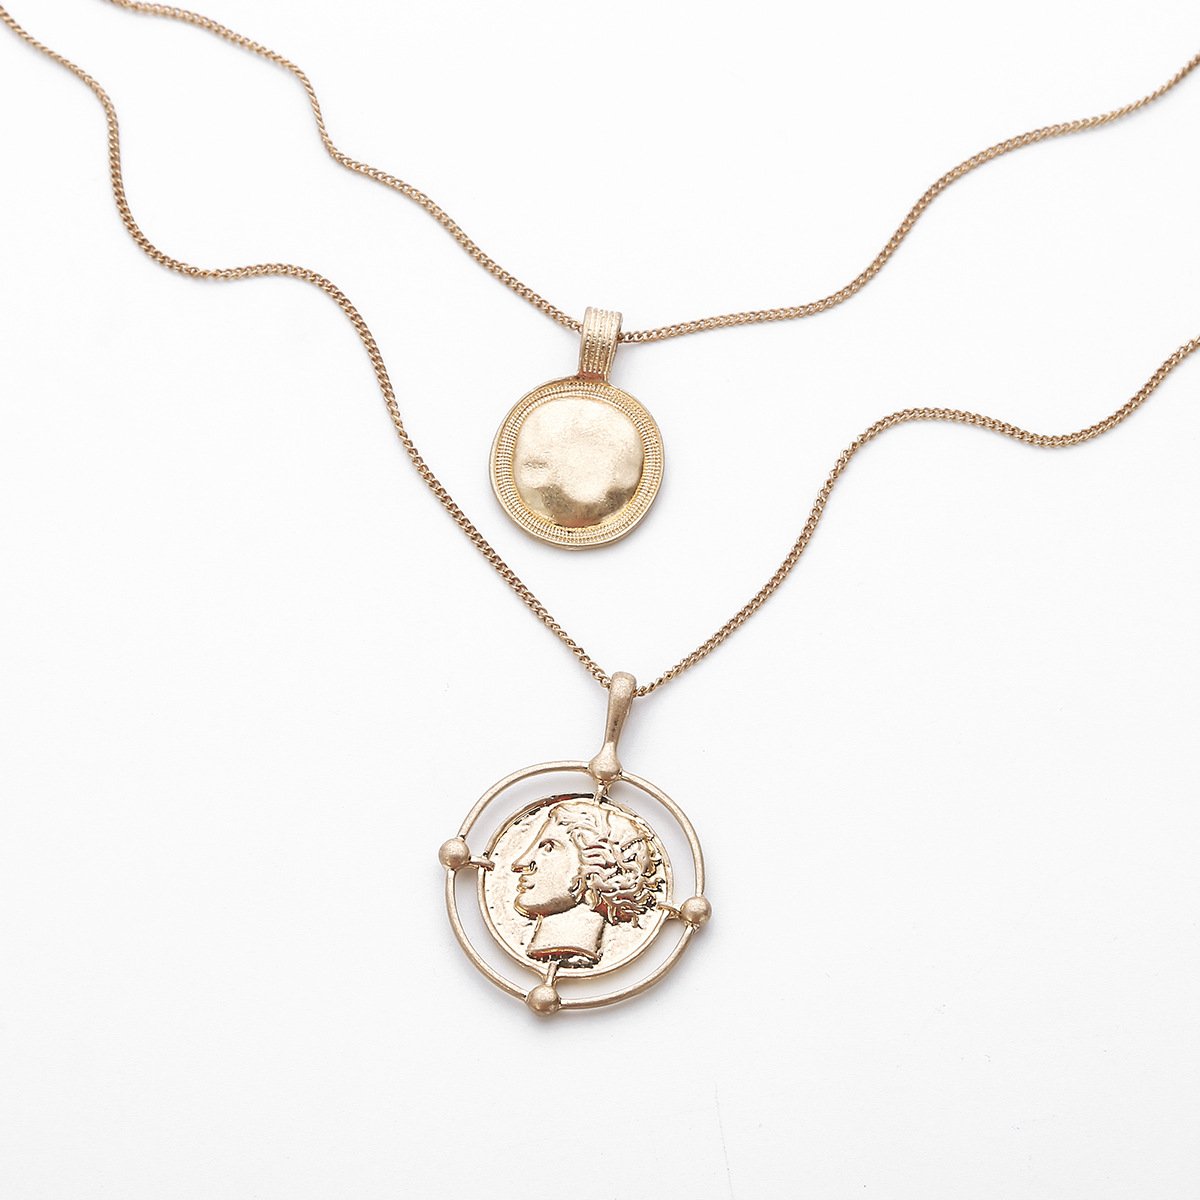 18K Gold Plated Coin Head Necklace - Hypoallergenic, Made in Italy, 18" + 2" Extender Bijou Her